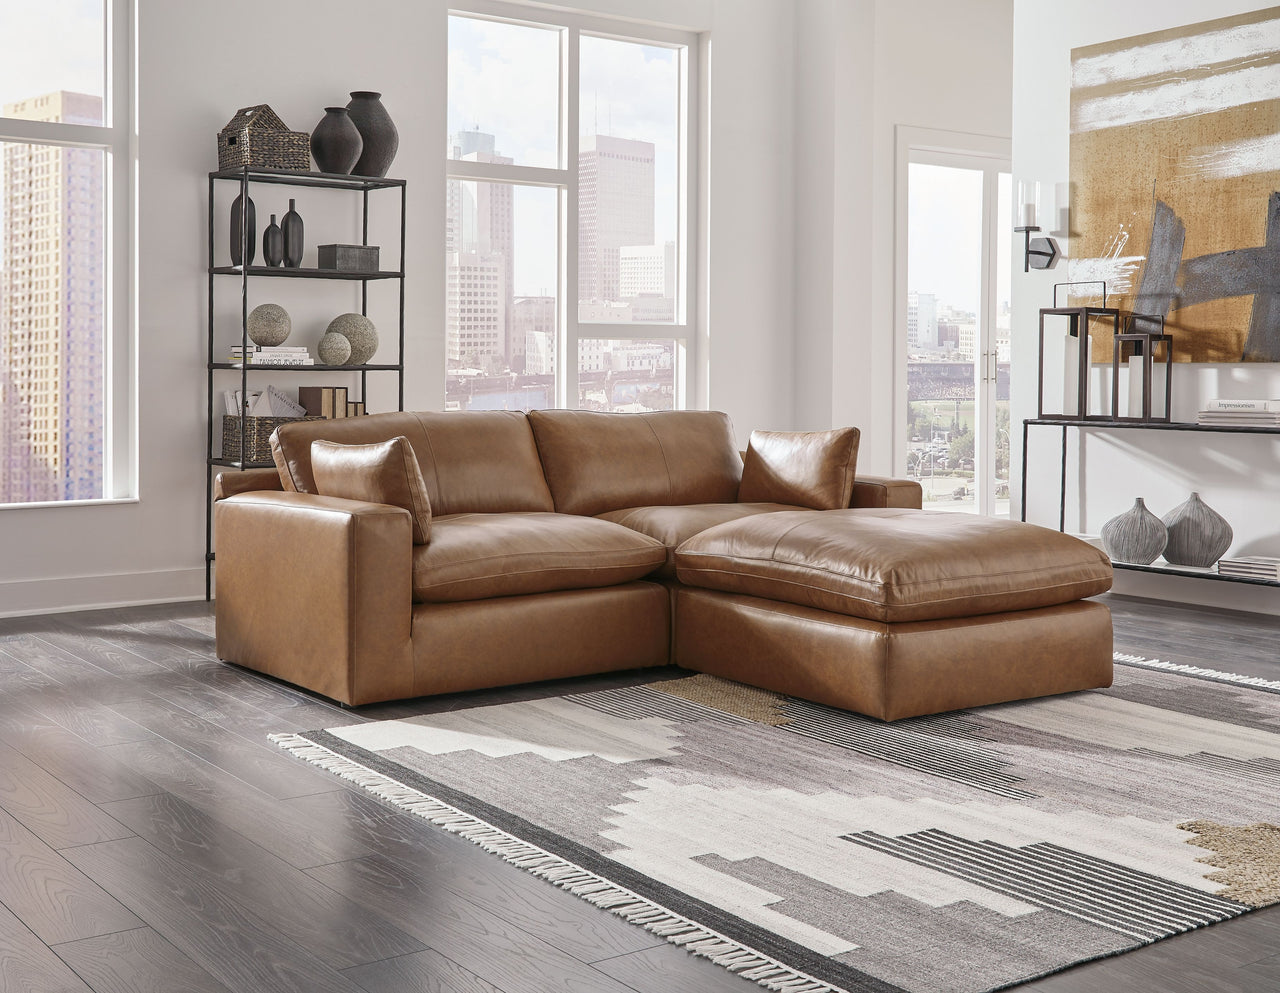 Emilia - Caramel - 3 Pc. - 2-Piece Sectional Loveseat, Ottoman Tony's Home Furnishings Furniture. Beds. Dressers. Sofas.